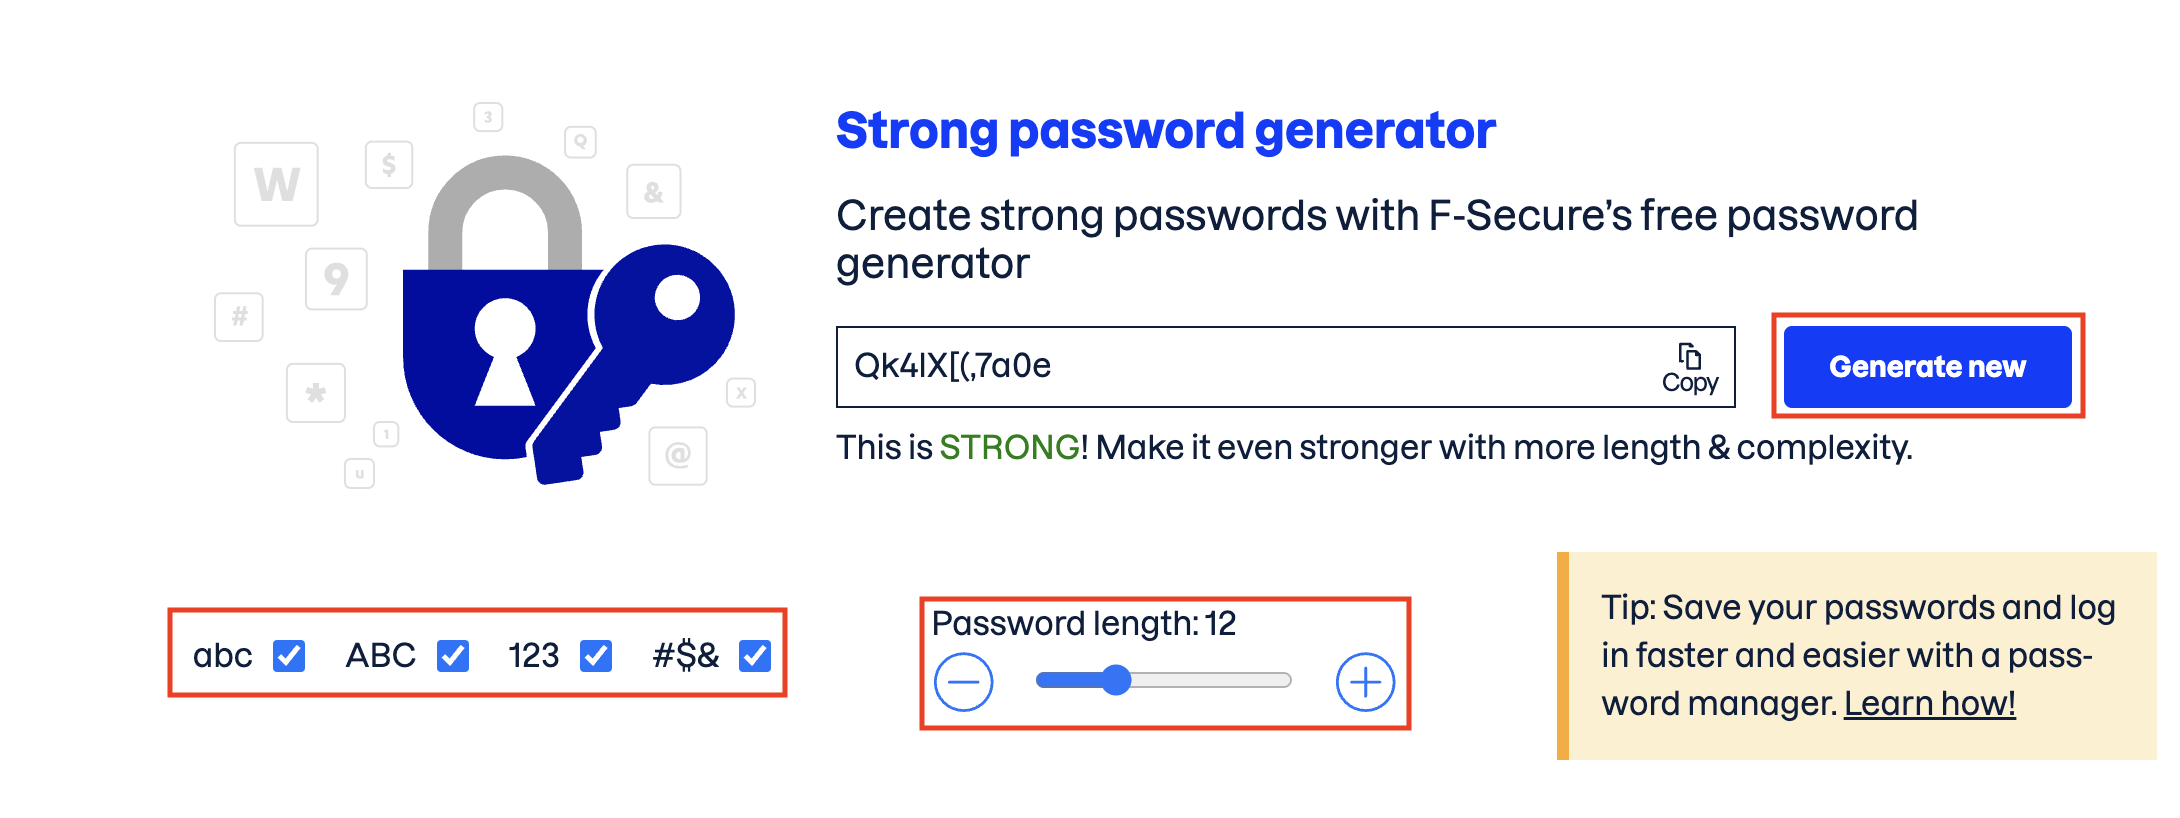 How to Create Strong Password